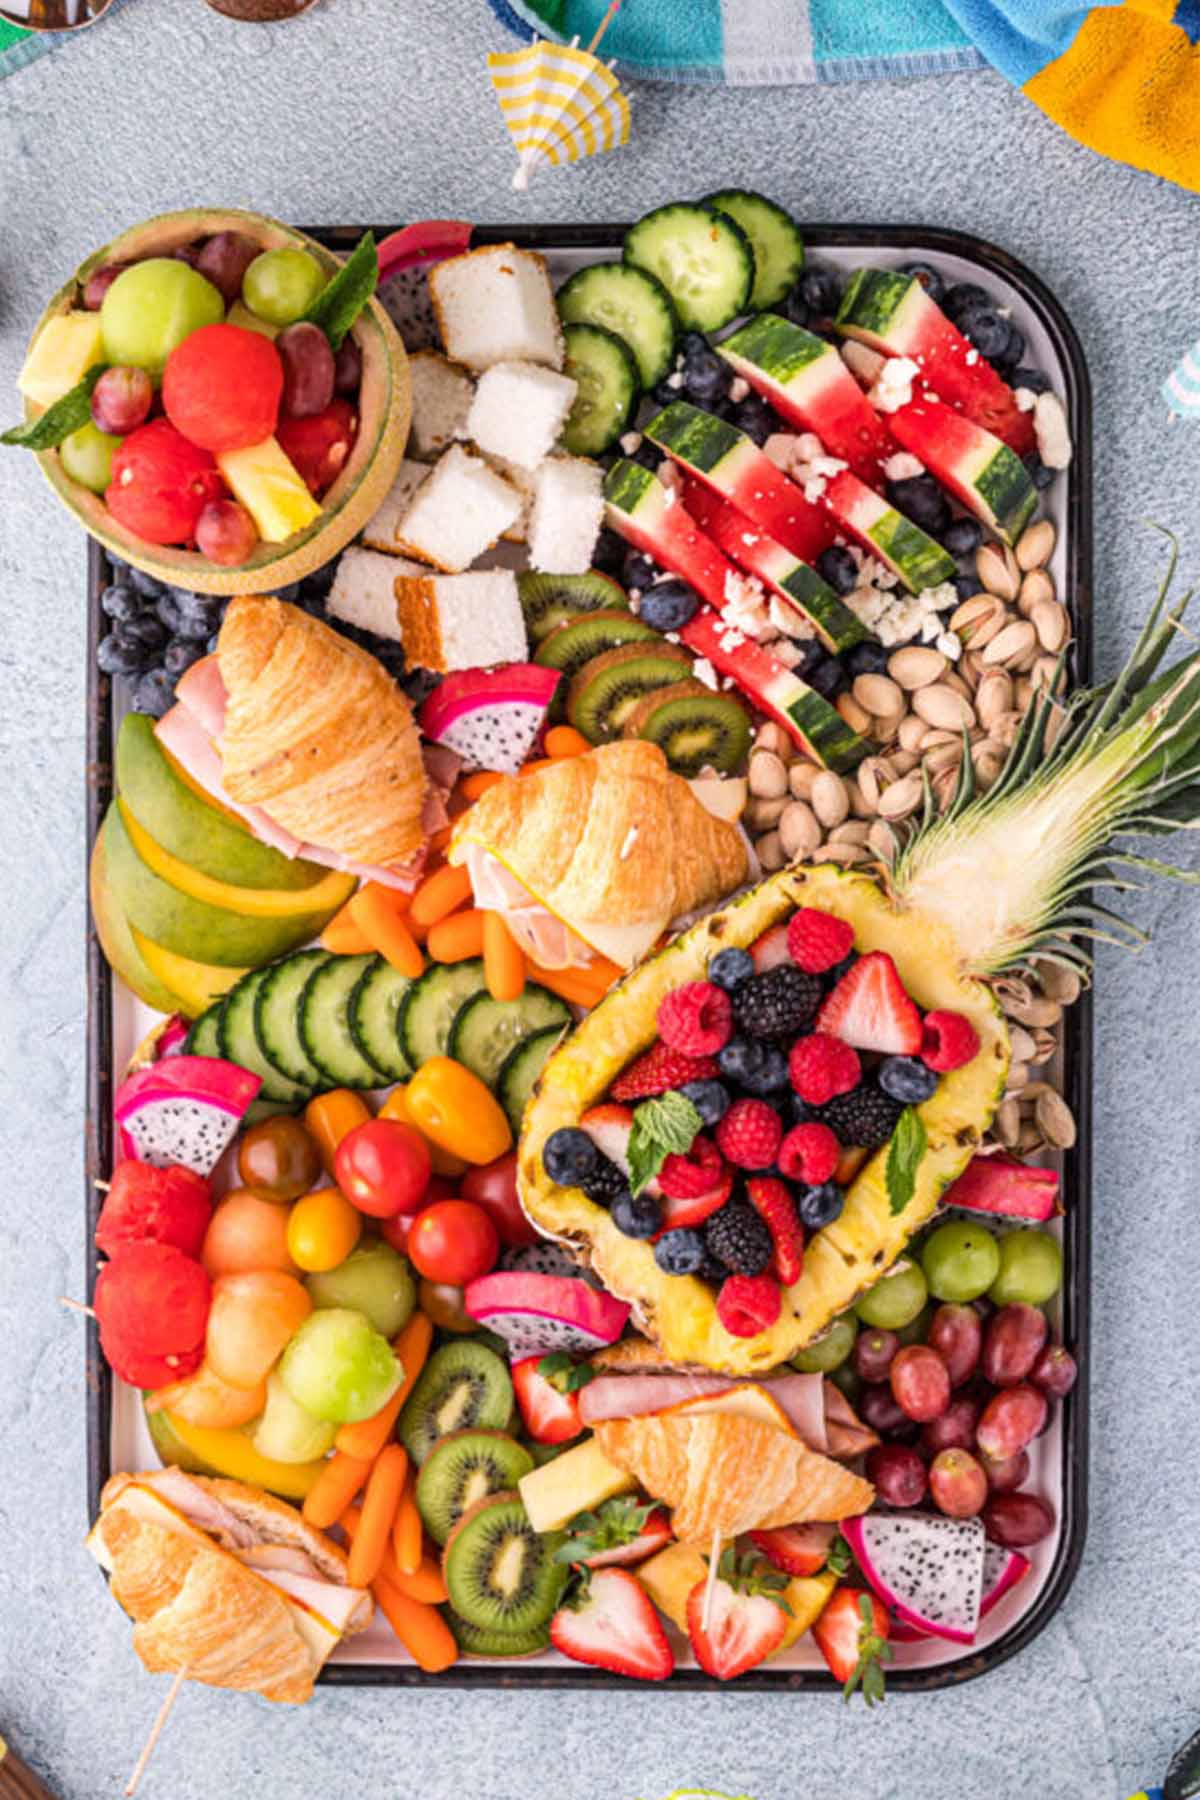 platter filled with summer fruit, vegetables, and croissant sandwiches.